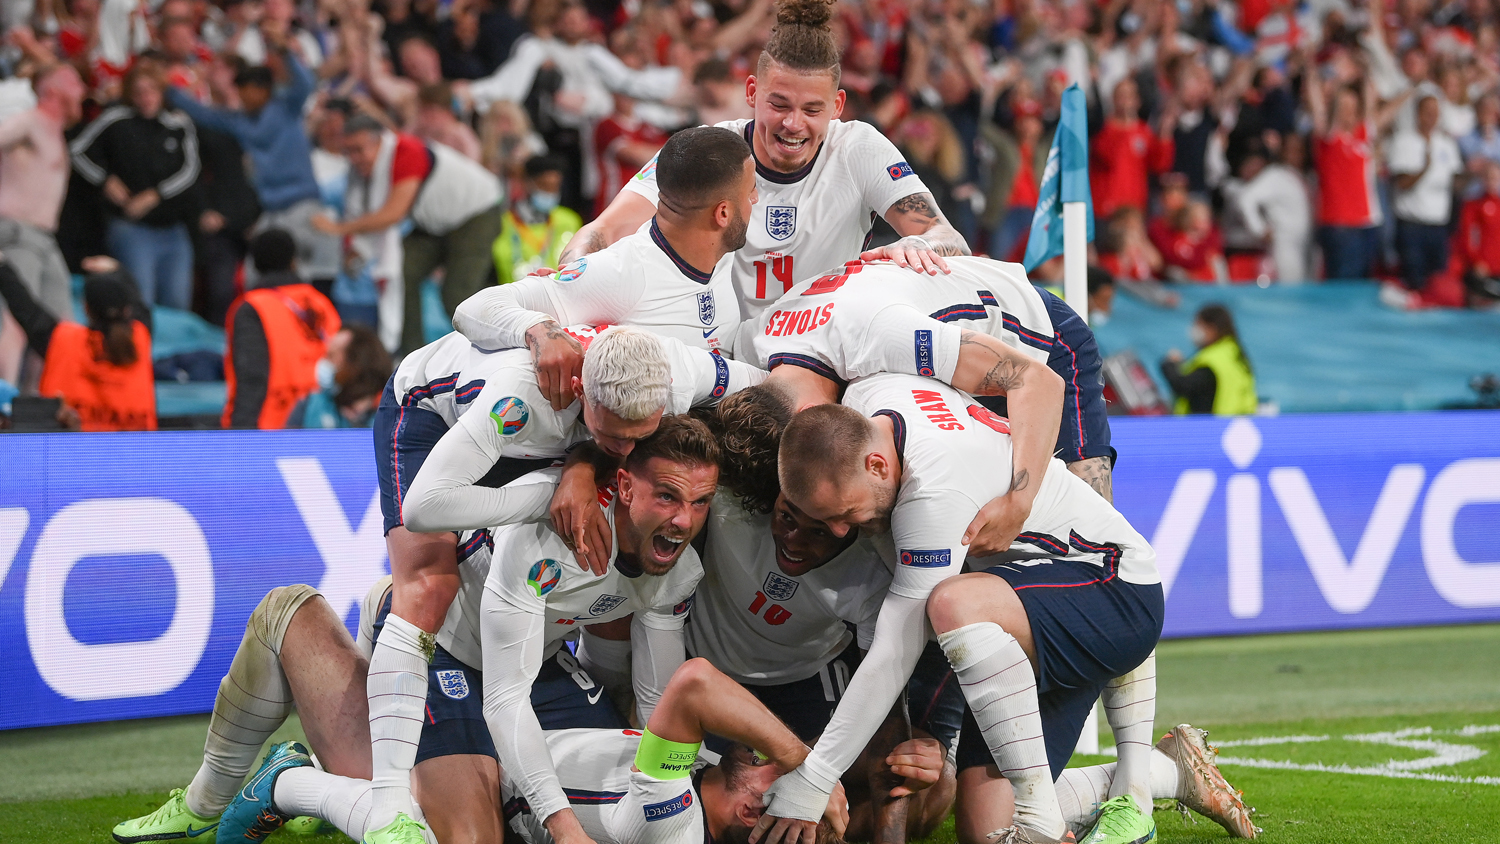 Your ultimate guide to England at Euro 2020 Fixtures, squad, locations and times